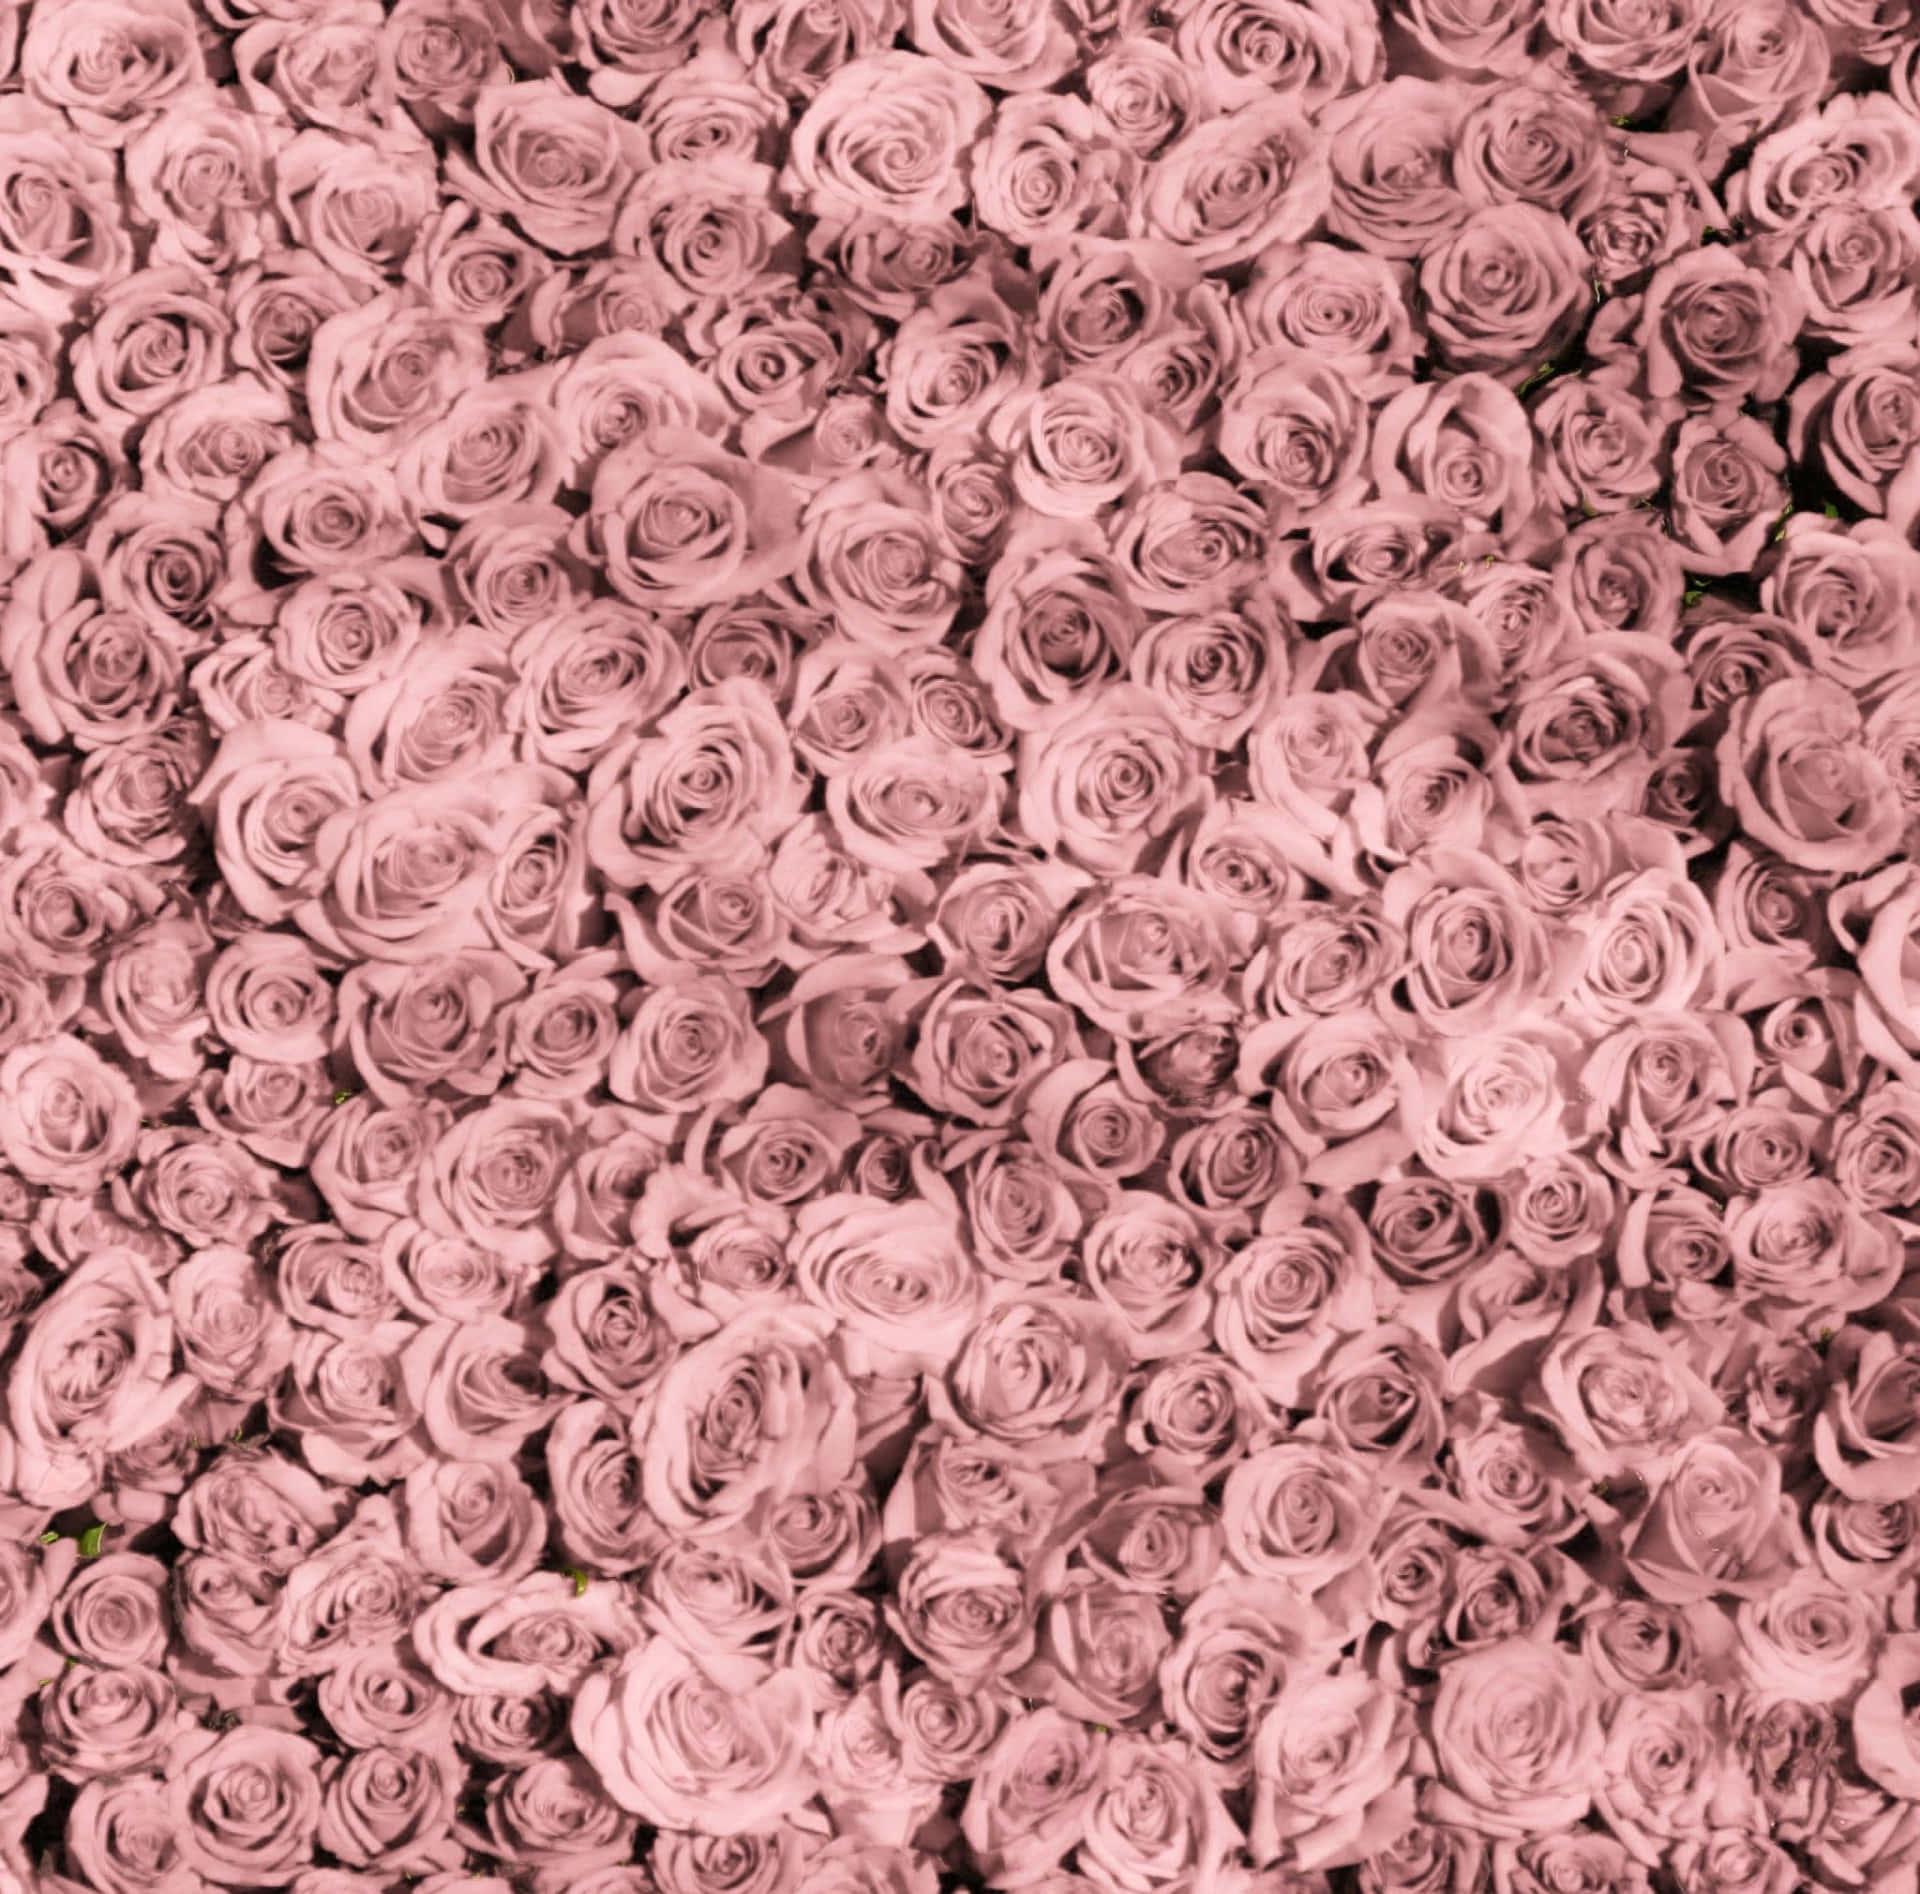 Tumblr Ipad Aesthetic Pink Roses Picture